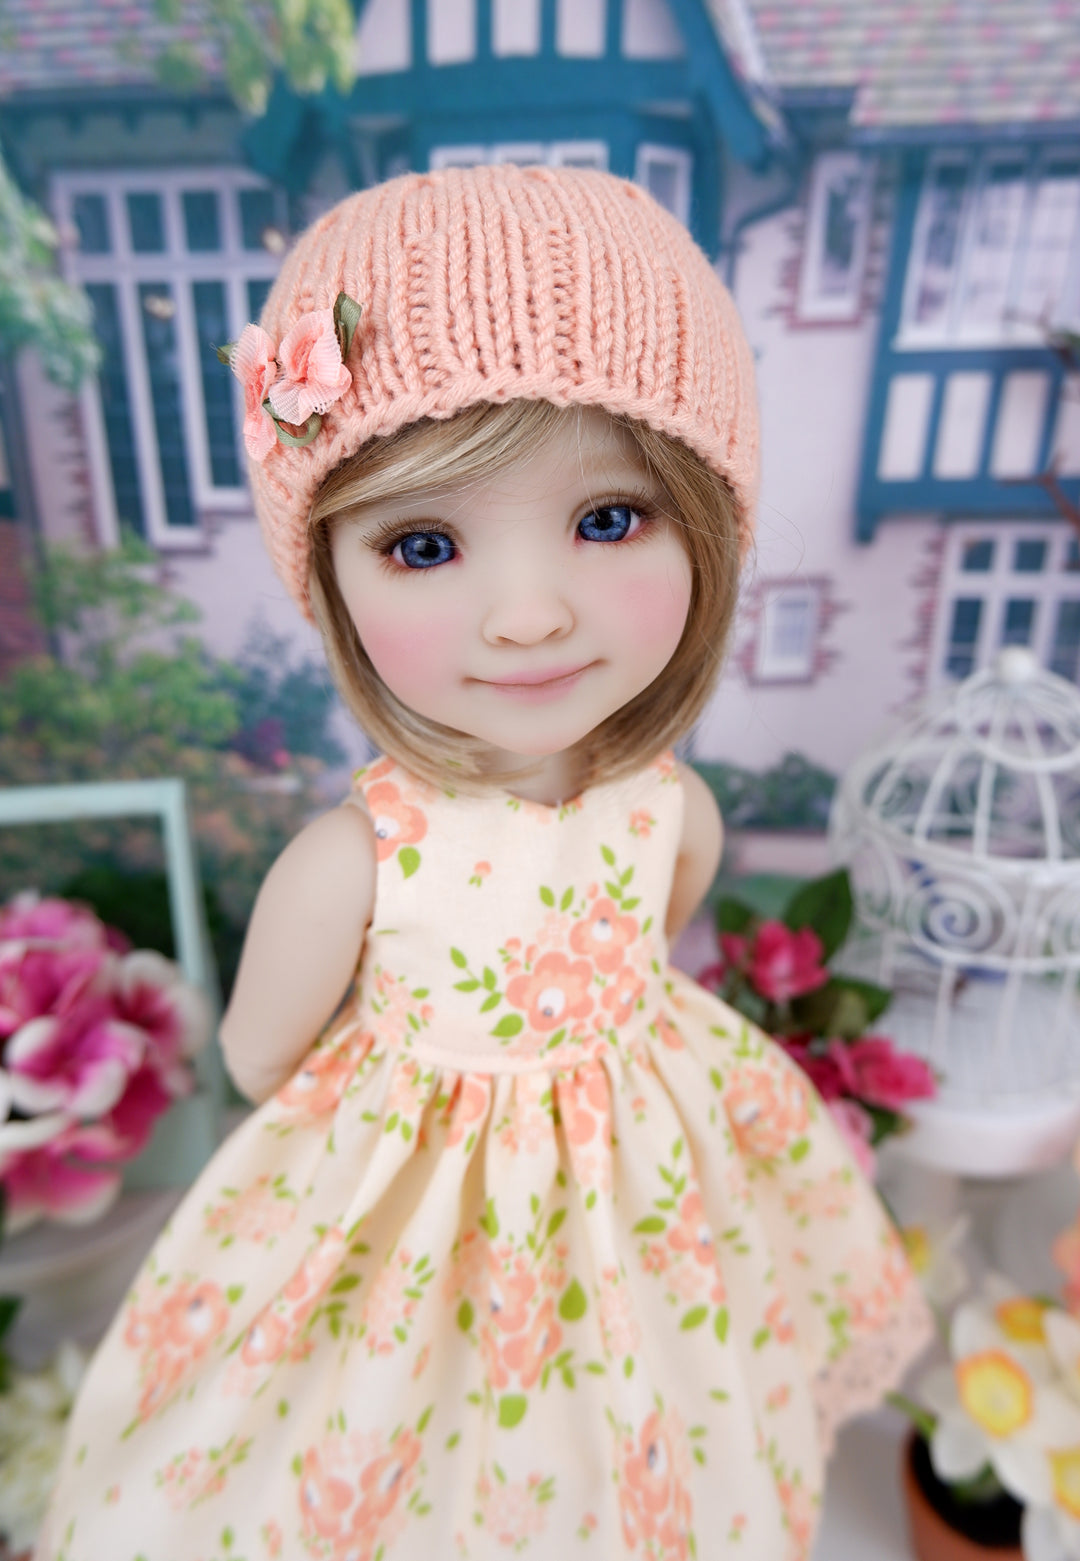 Apricot Floral - dress and sweater set with shoes for Ruby Red Fashion Friends doll